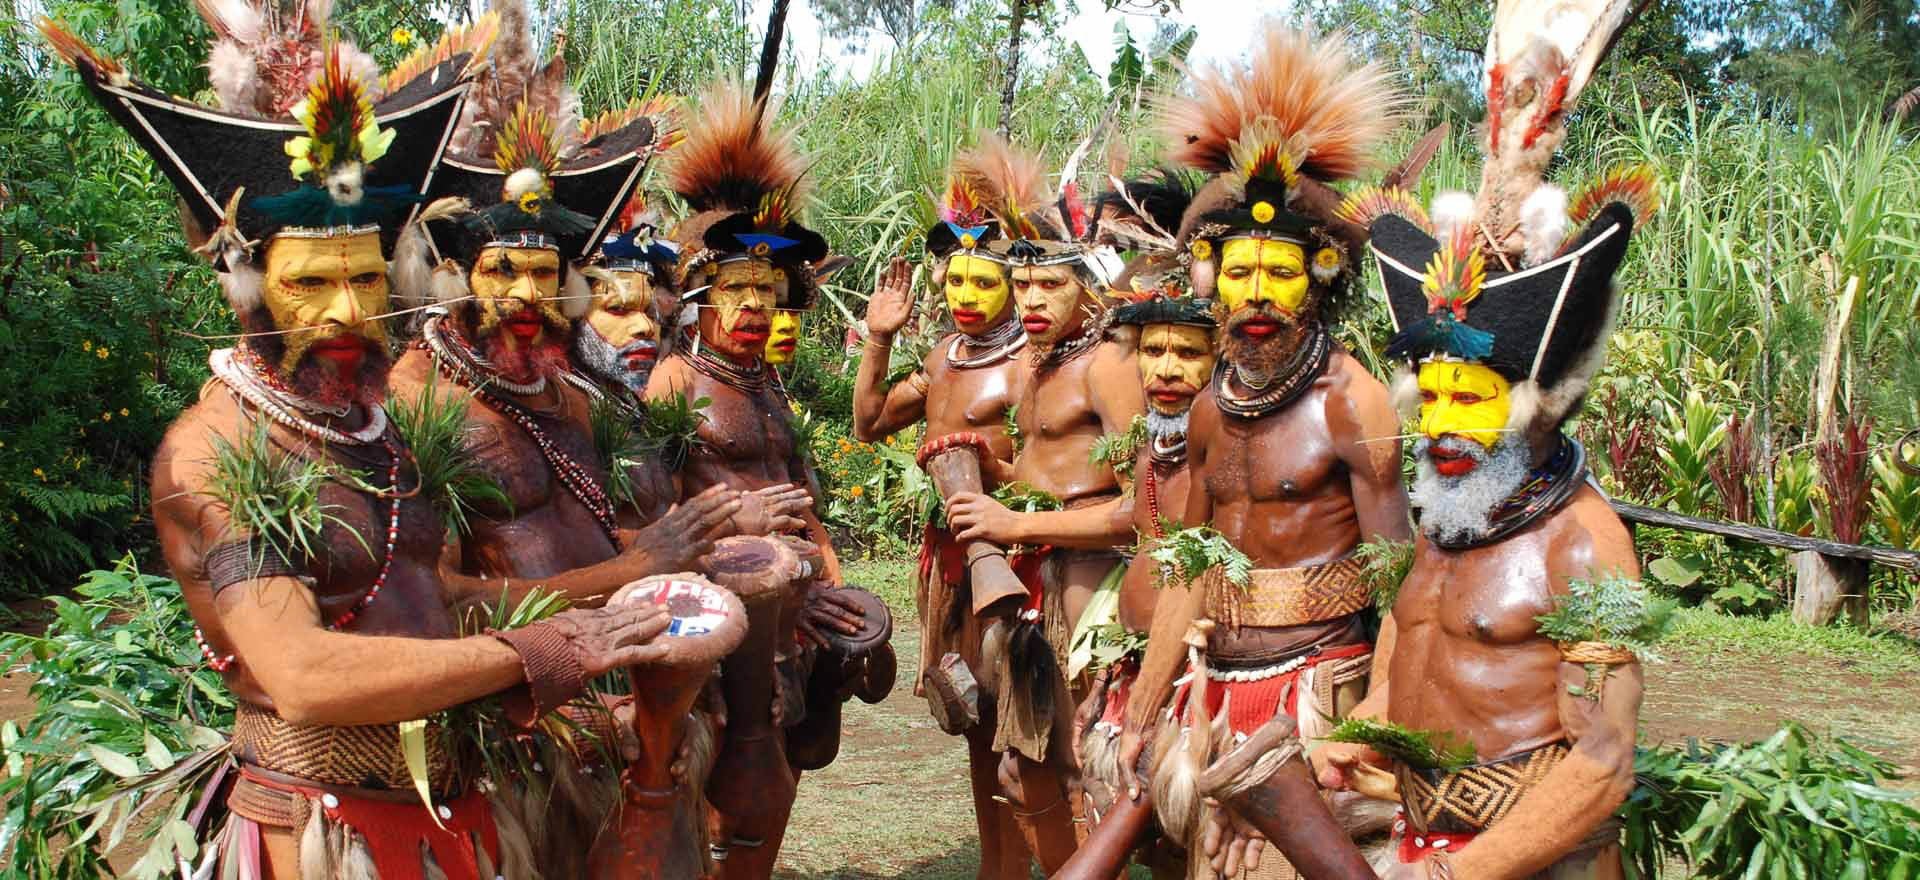 Huli wigmen performing traditional dance - Papua New Guinea Holidays and Tours